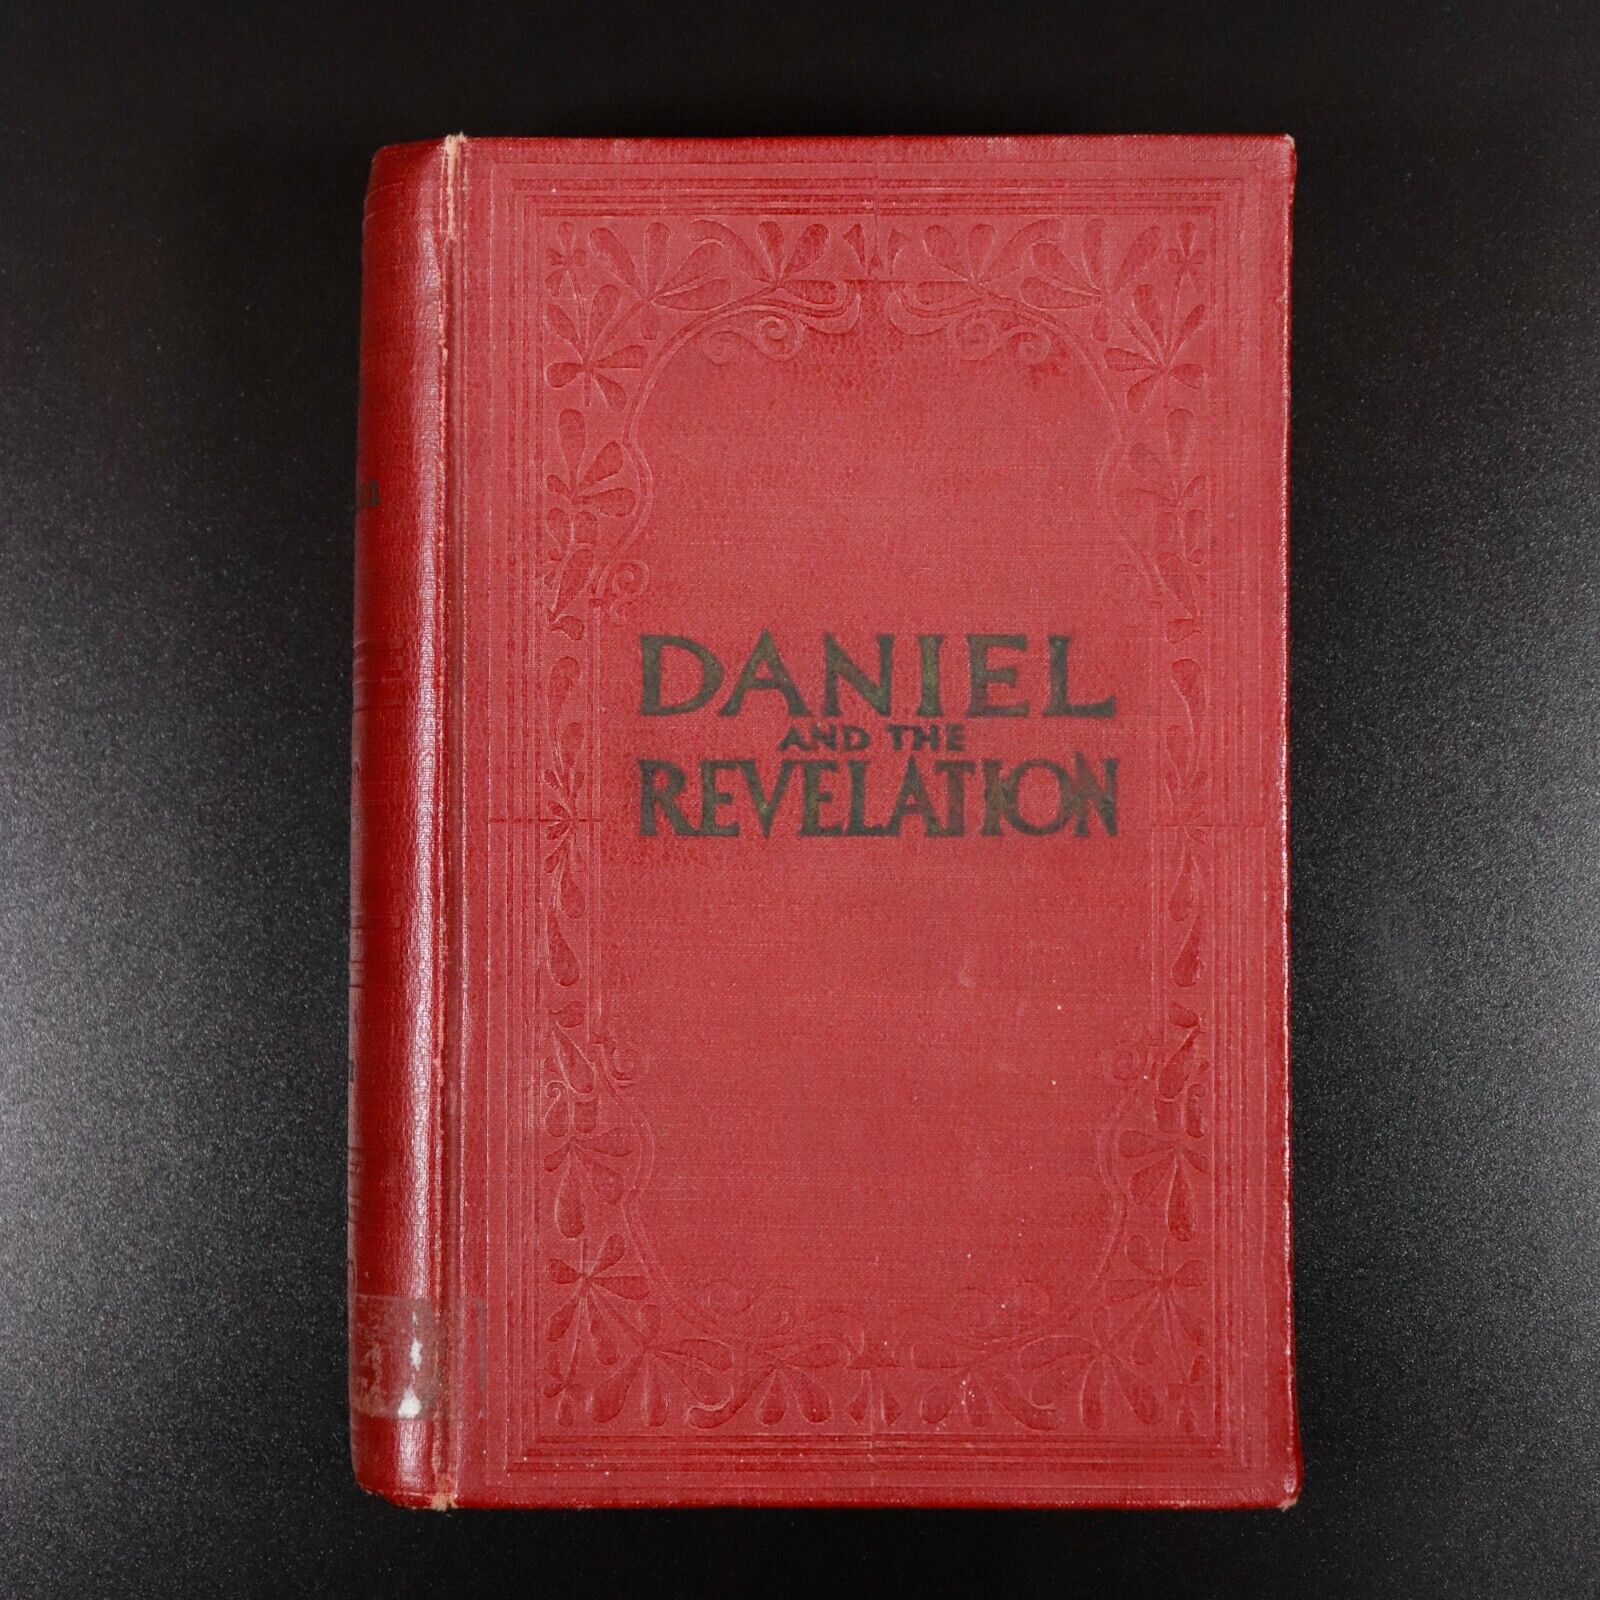 c1905 Daniel & The Revelation by Uriah Smith Antique Illustrated Theology Book